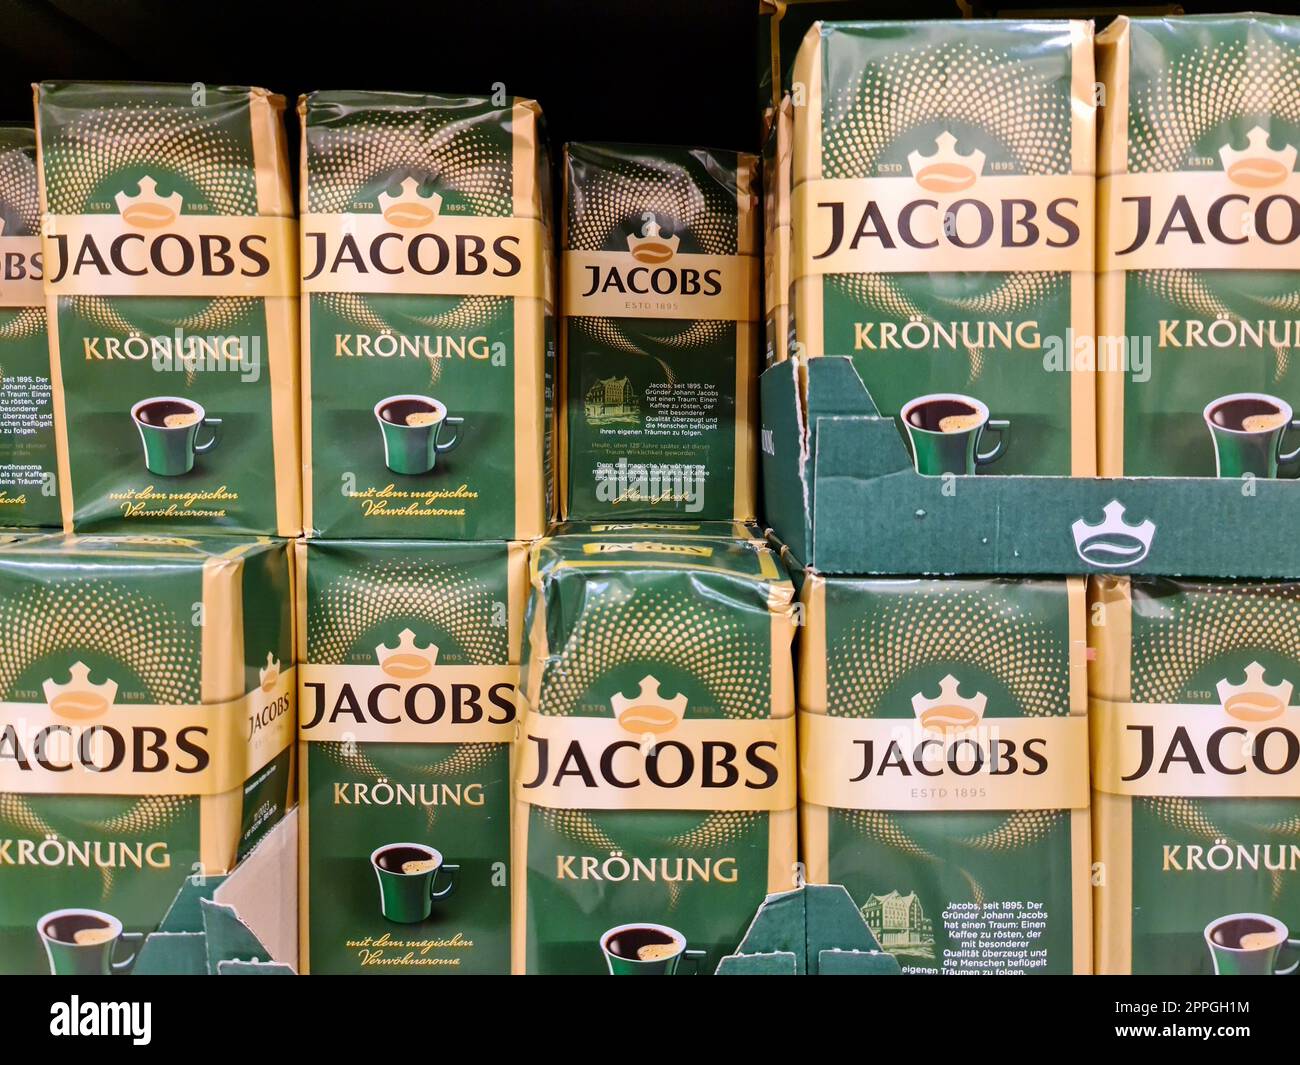 Kiel,Germany - 20 August 2022: Numerous packages of Jacobs brand coffee on a supermarket shelf Stock Photo